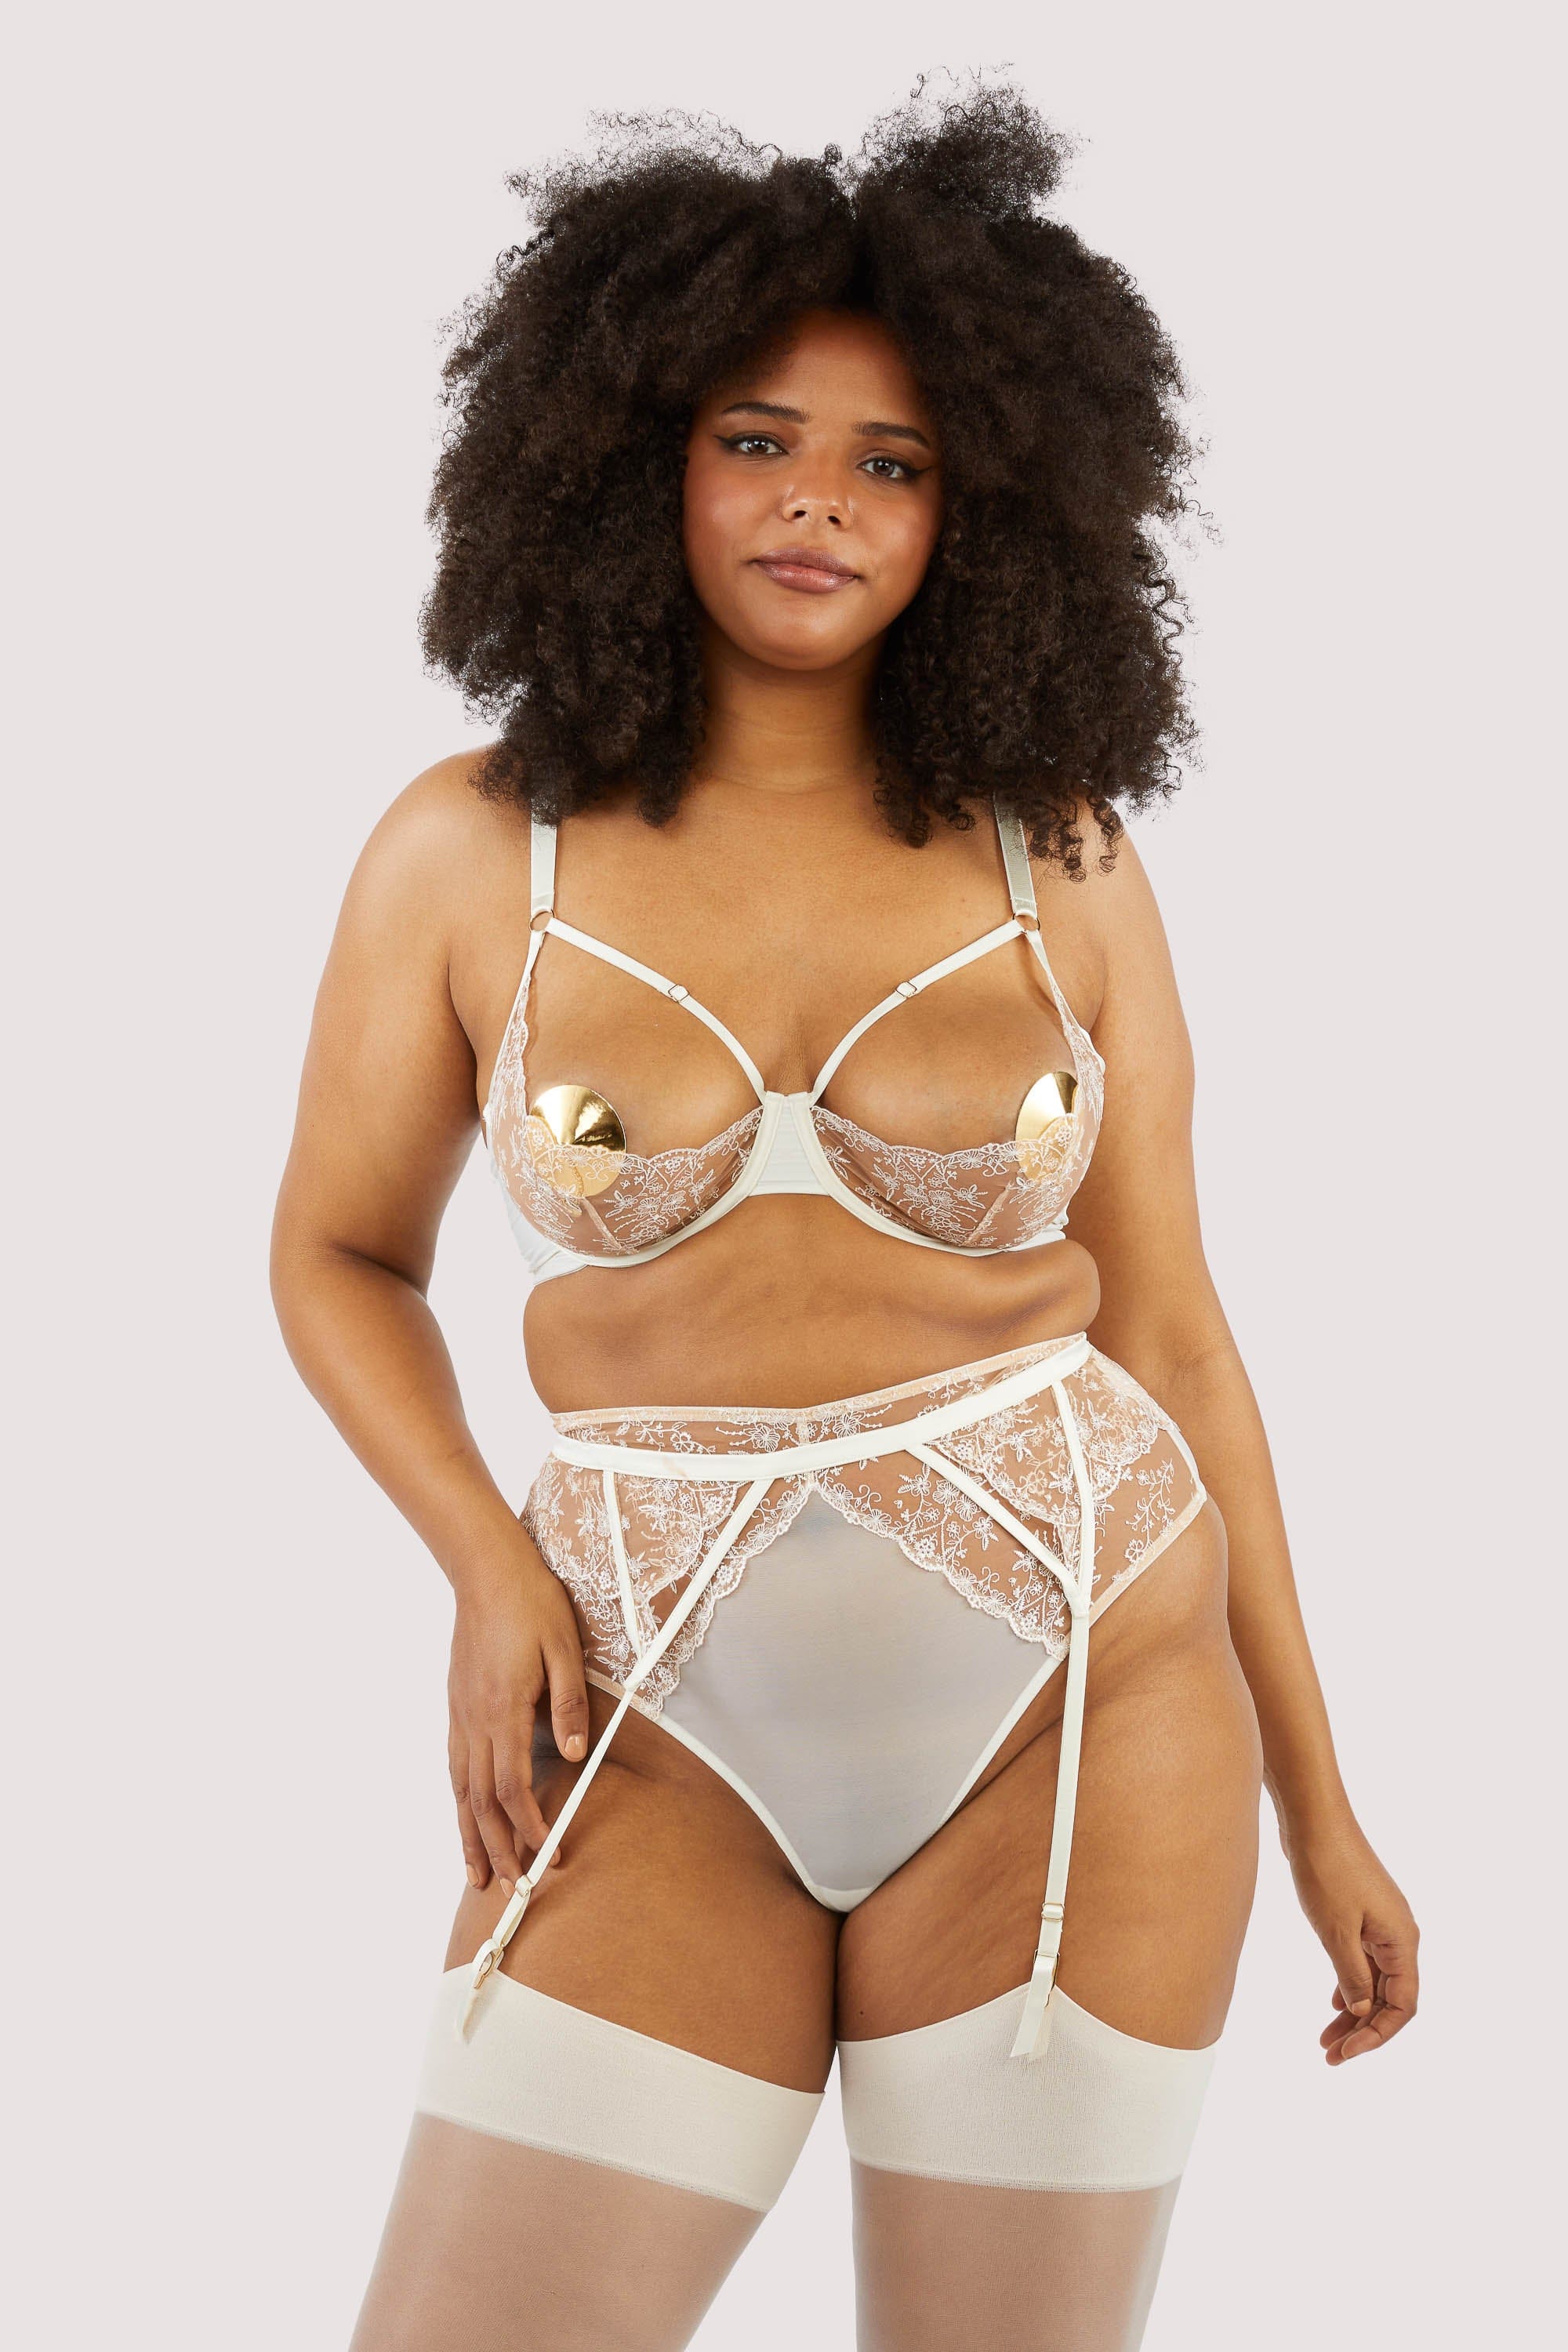 Cassia Ivory Floral Embroidery Suspender